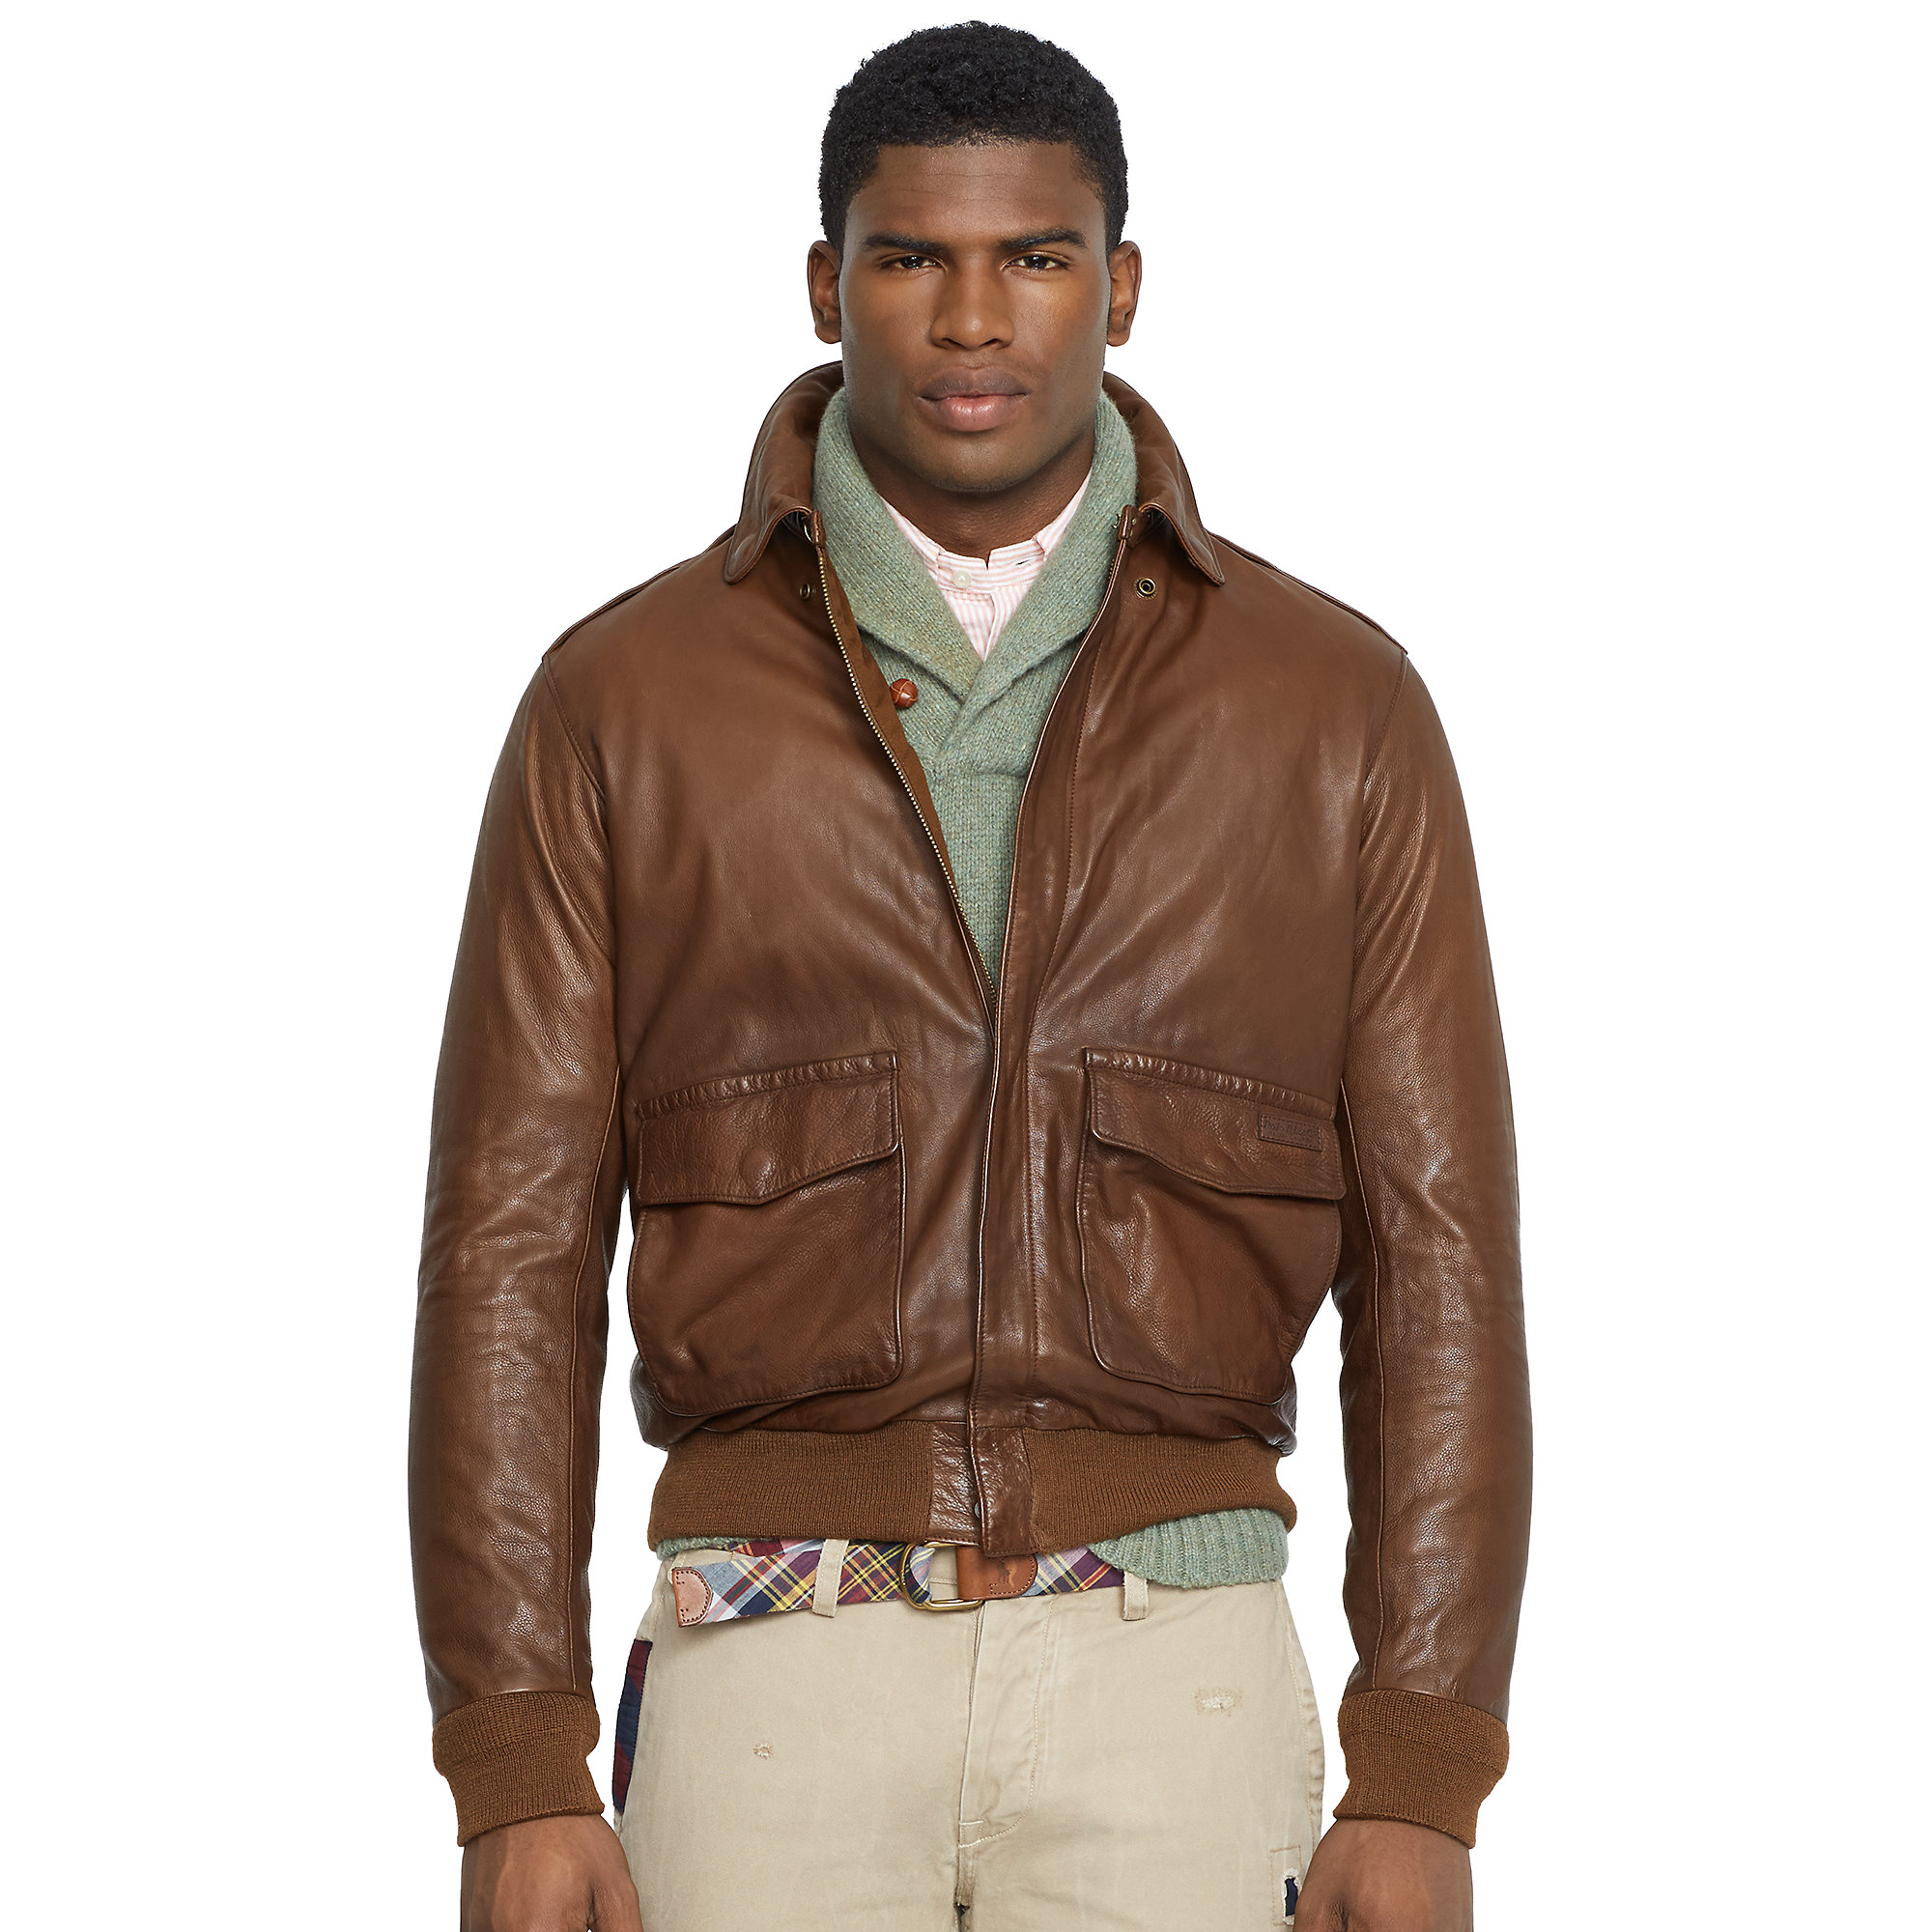 Lyst - Polo ralph lauren Leather Farrington A2 Jacket in Brown for Men